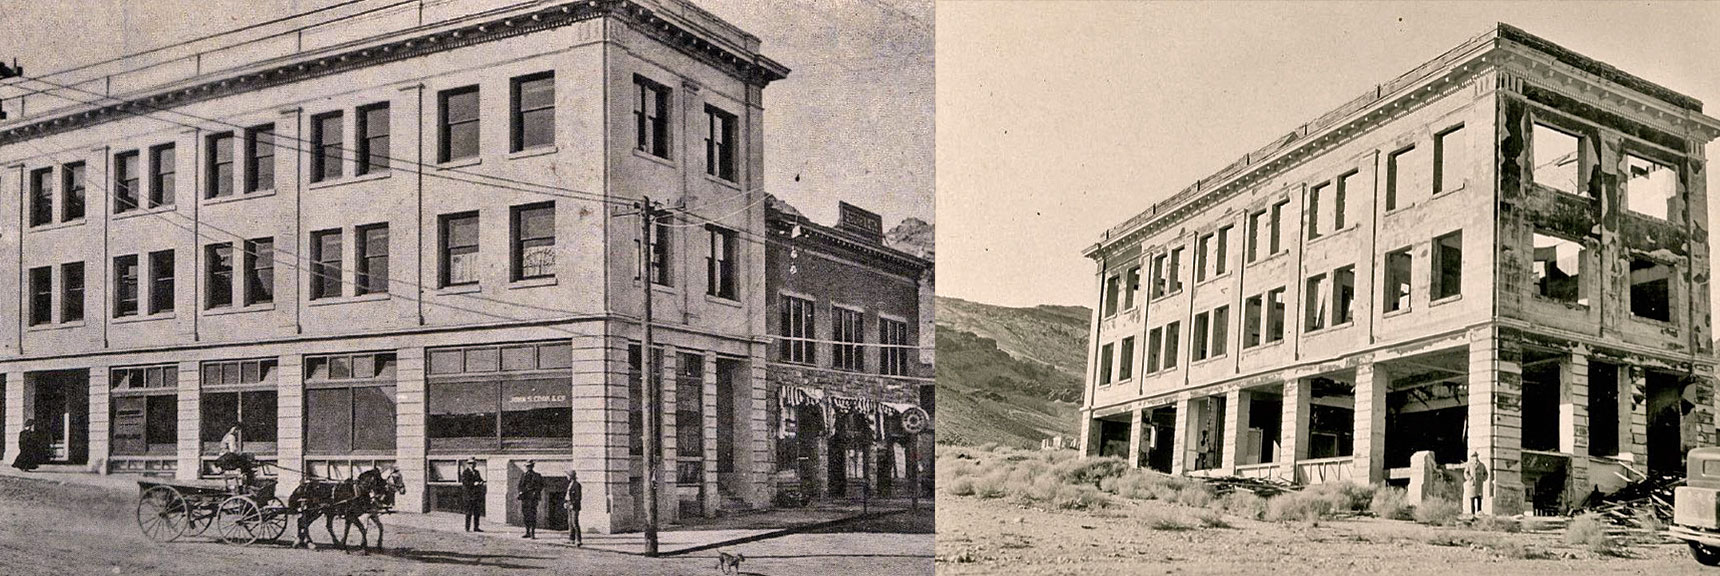 Cook Bank Building 1909 and 1923 | Rhyolite Ghost Town, Nevada